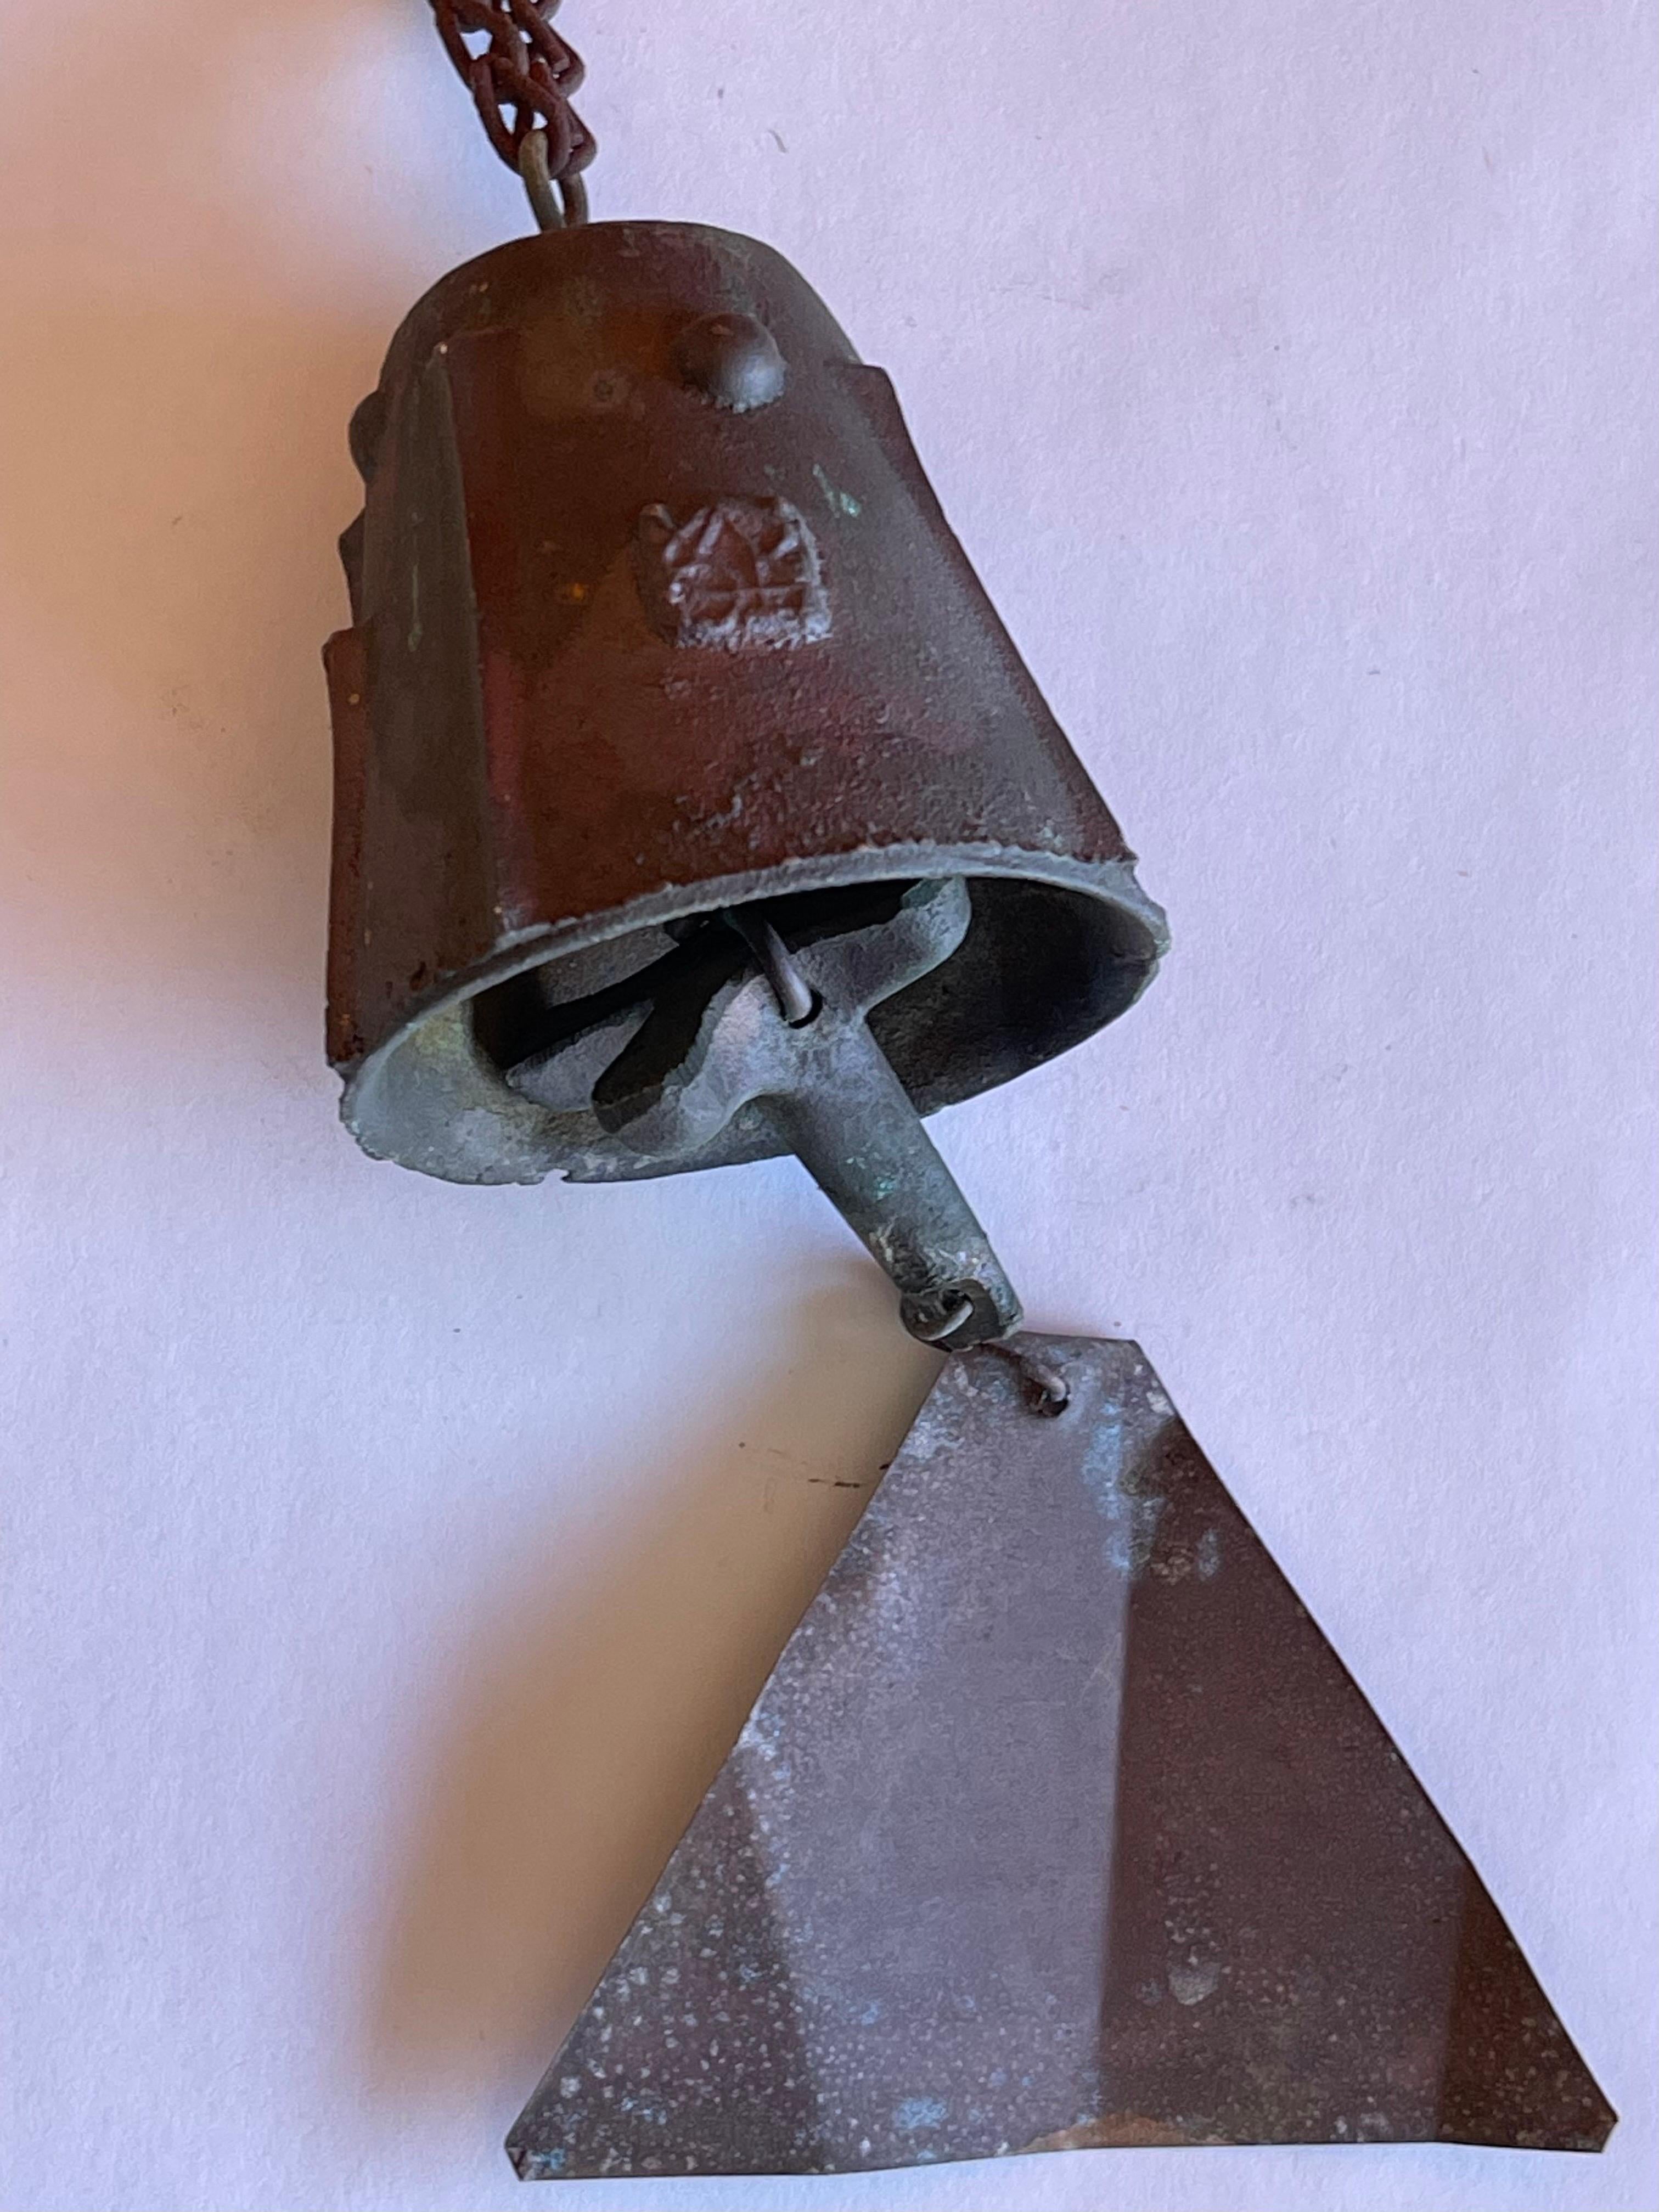 Small Bronze Wind Chime / Bell by Paolo Soleri for Cosanti 2